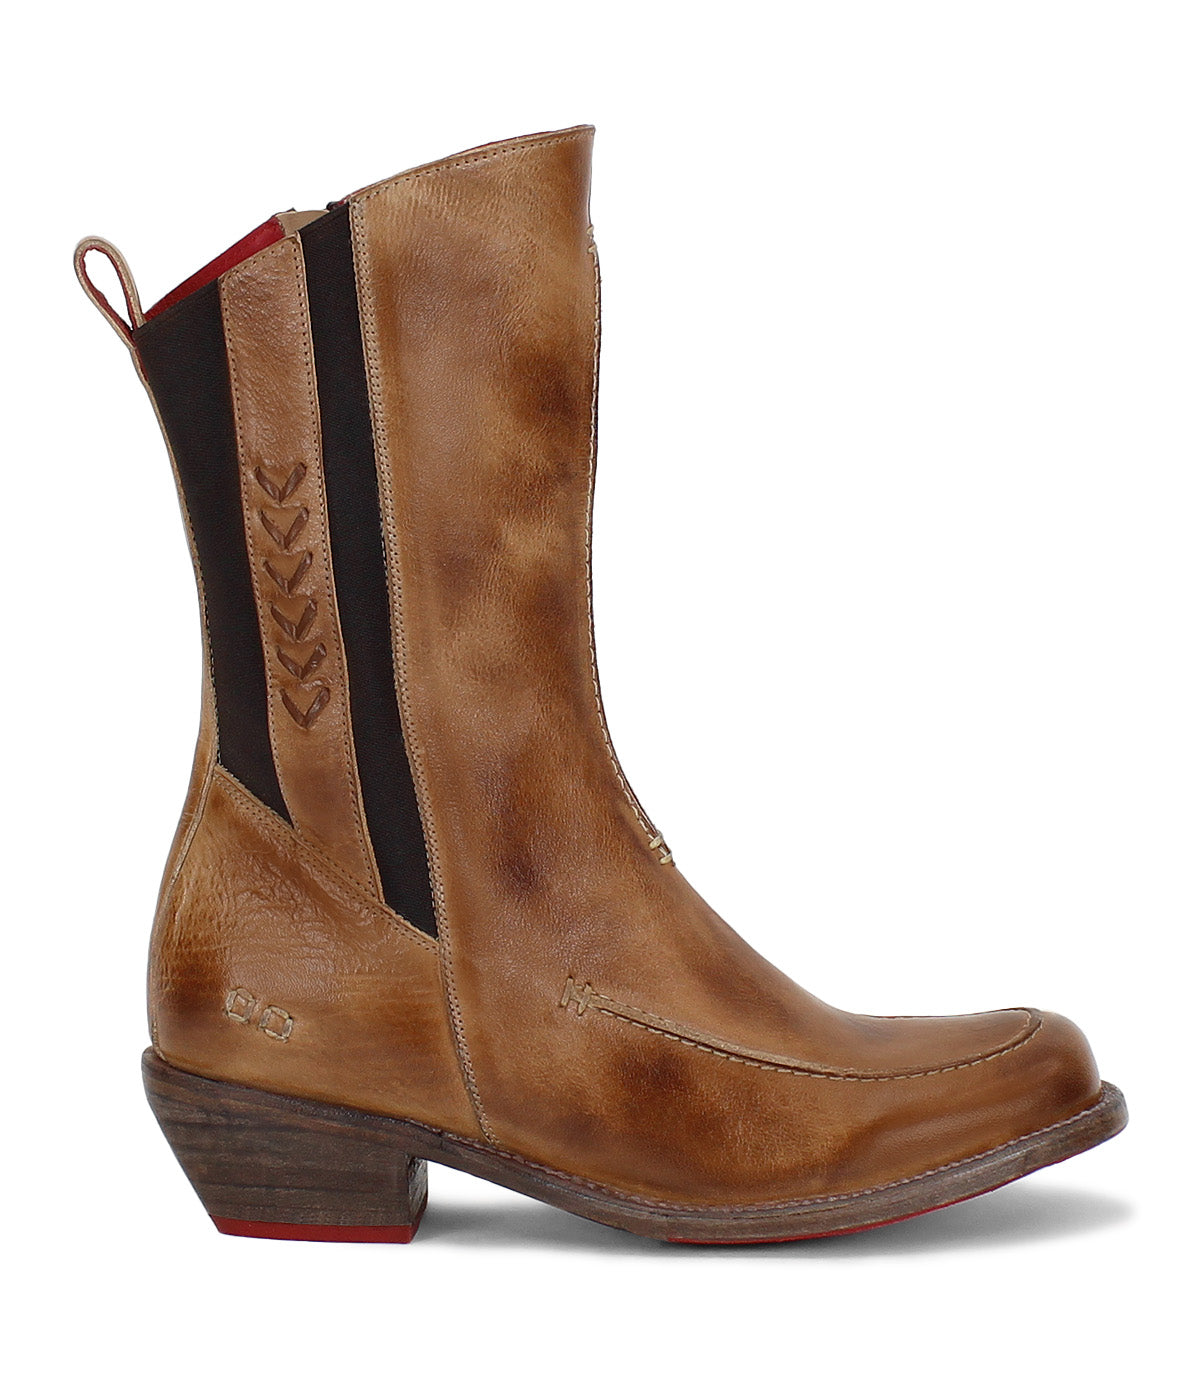 A women's Nivi boot by Bed Stu with a red sole.